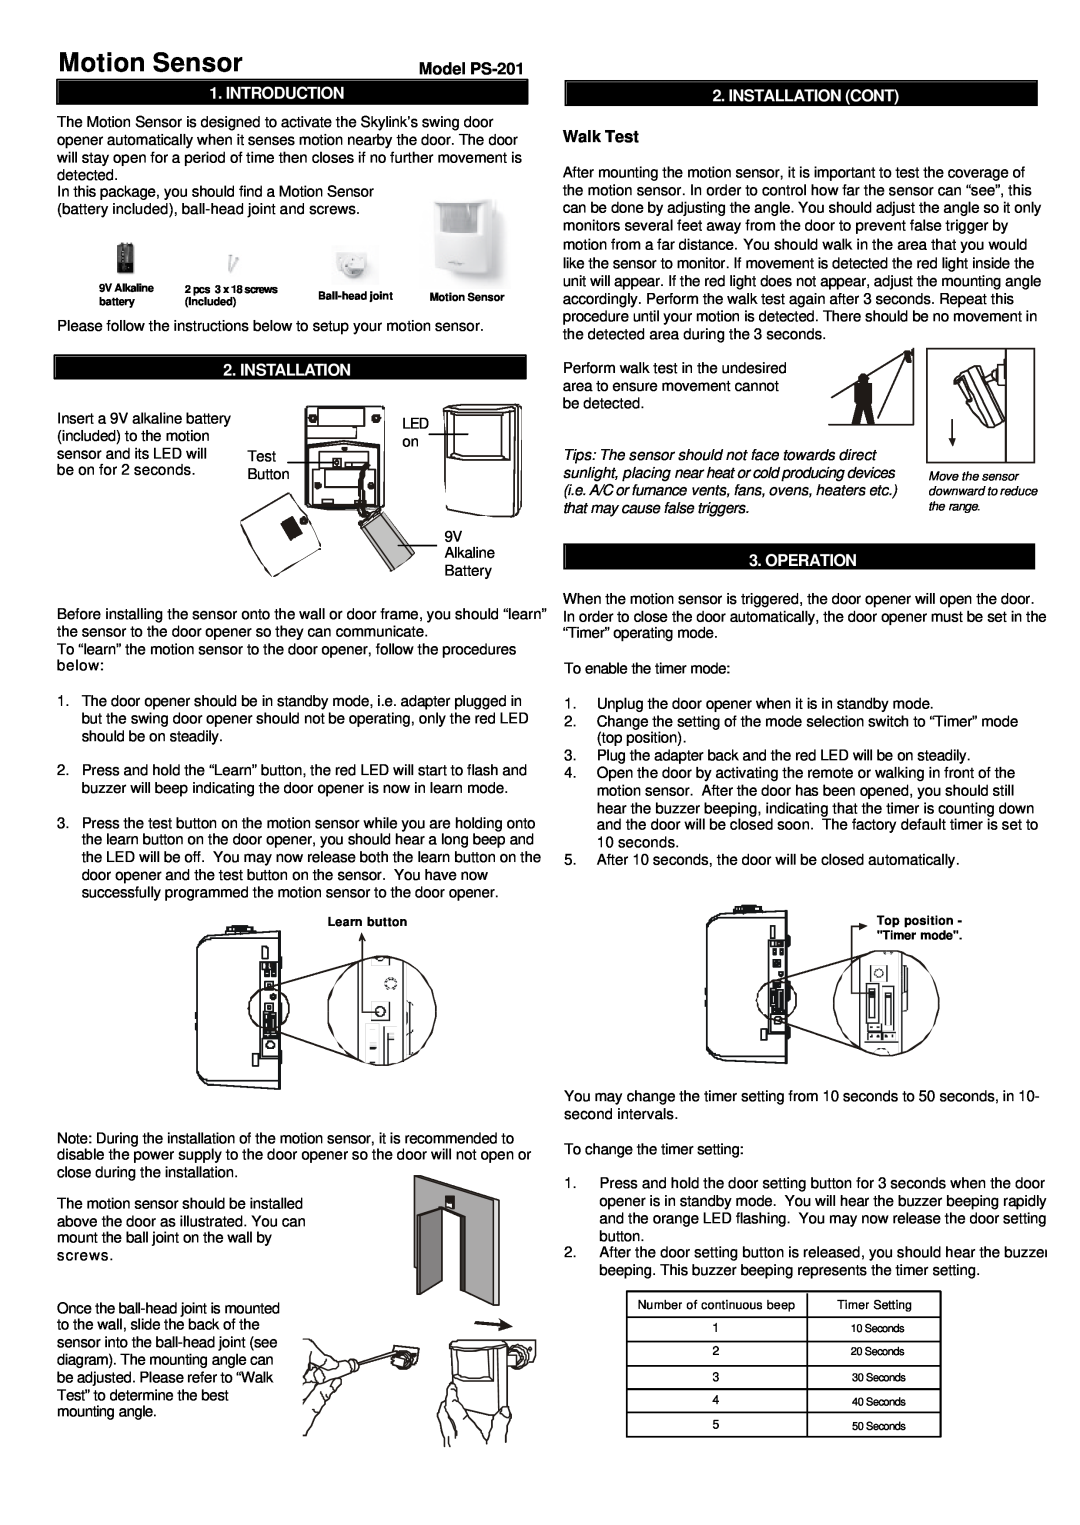 SkyLink WB-201, WM-201, MC-201, PS-201, KP-434, DM-100A user manual Otodor --Swing Door Opener --Applications, Do not use for 